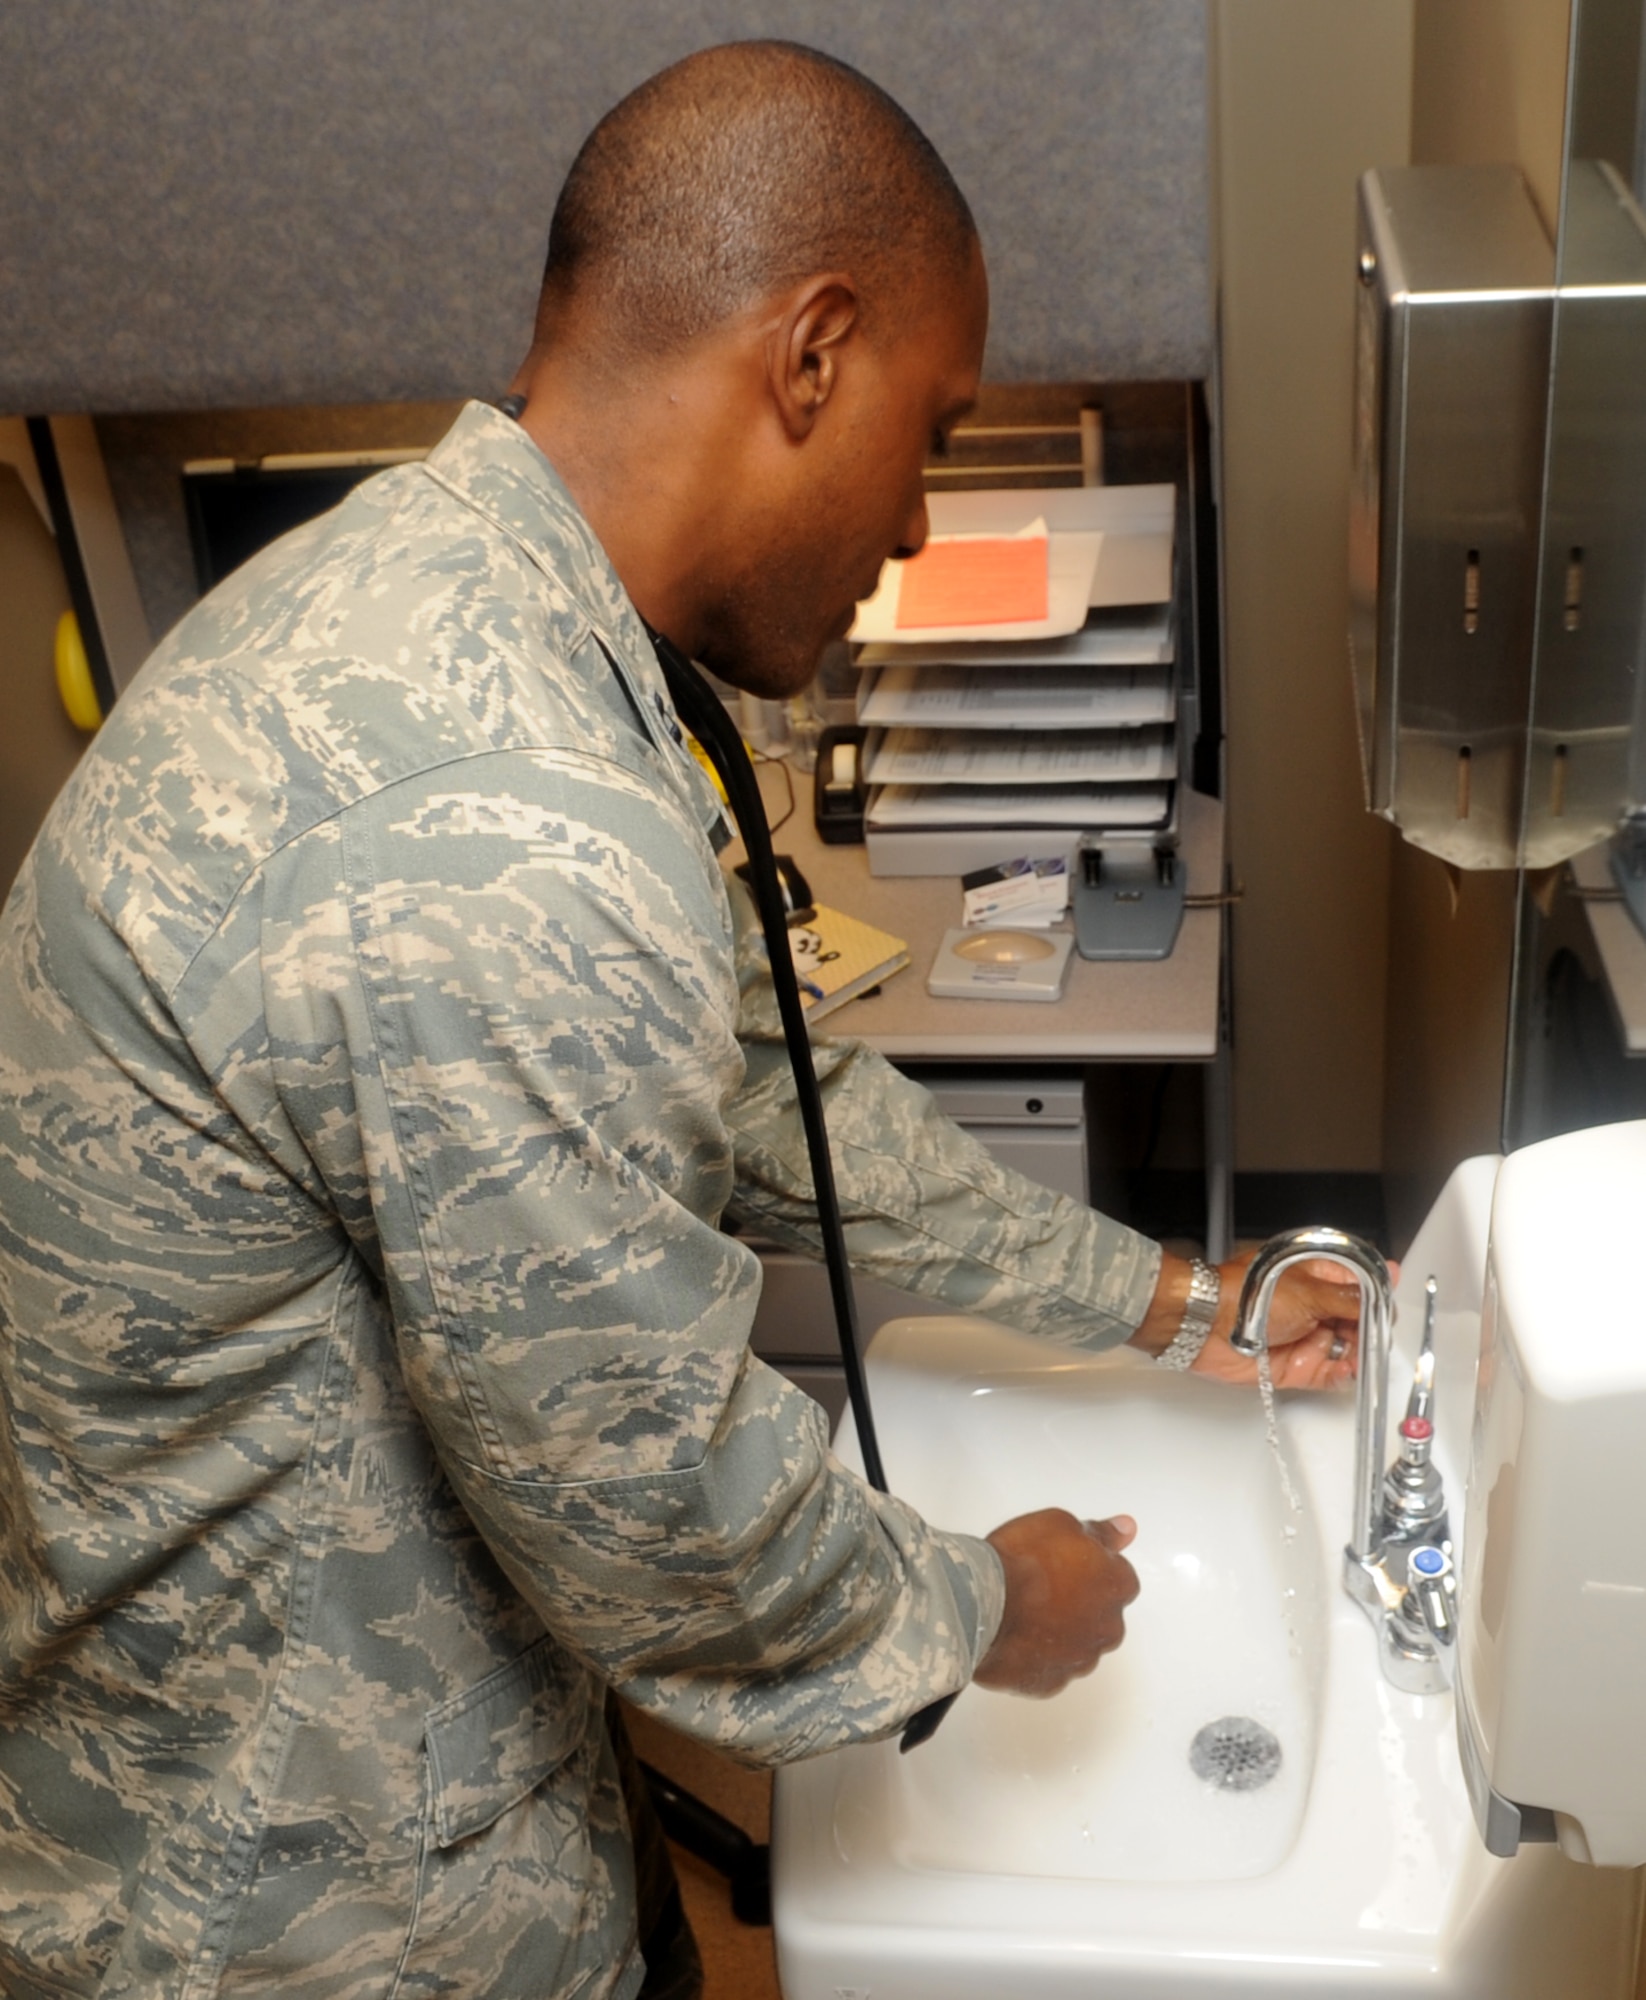 Capt. Mark Dudley, 2nd Medical Operations Squadron, washes his hands before examining a patient on Barksdale Air Force Base, La., Sept 8. It's important for doctors to wash their hands before and after seeing patients to prevent spreading infections. (U.S. Air Force photo/Senior Airman Kristin High) (RELEASED)